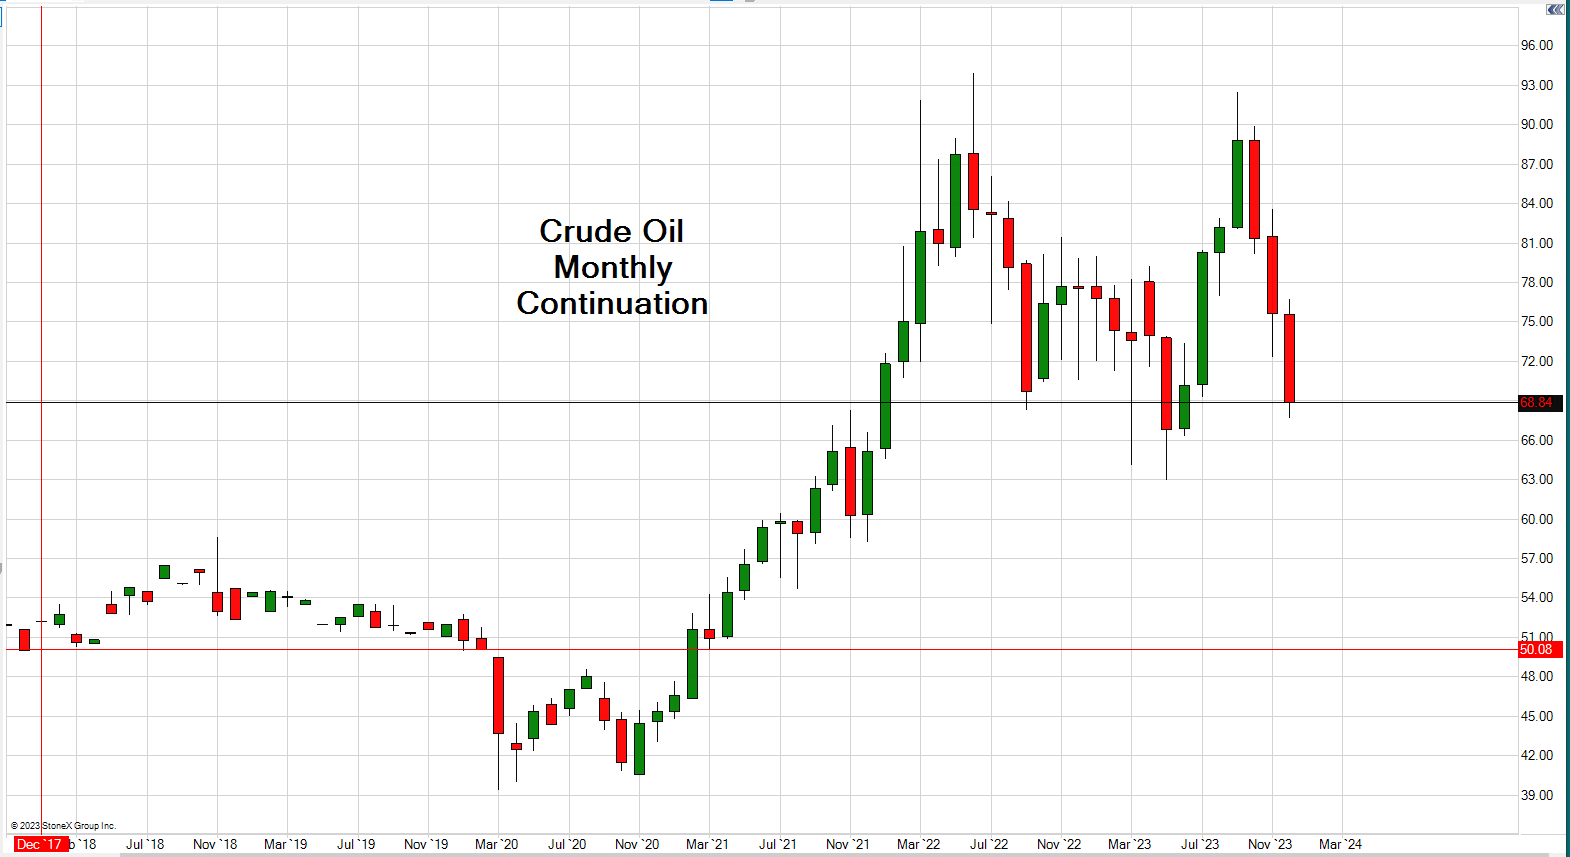 Light Crude Oil Futures Trading Chart updated March 11th, 2023